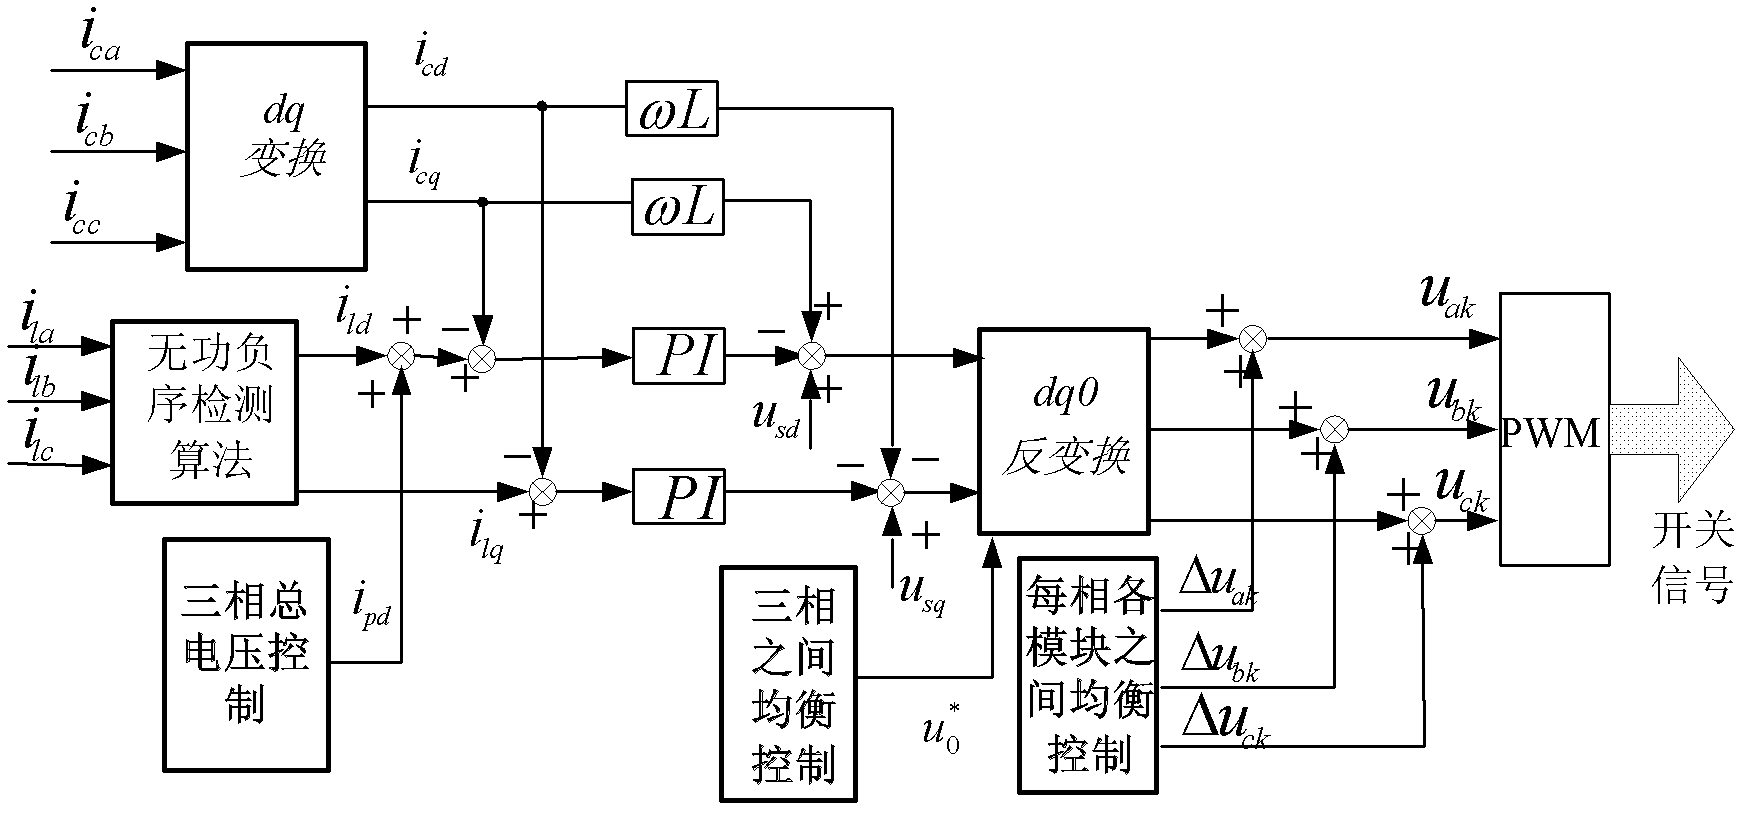 Direct-current bus inter-phase voltage balancing control method for chained type triangular connection STATCOM (Static Synchronous Compensator)